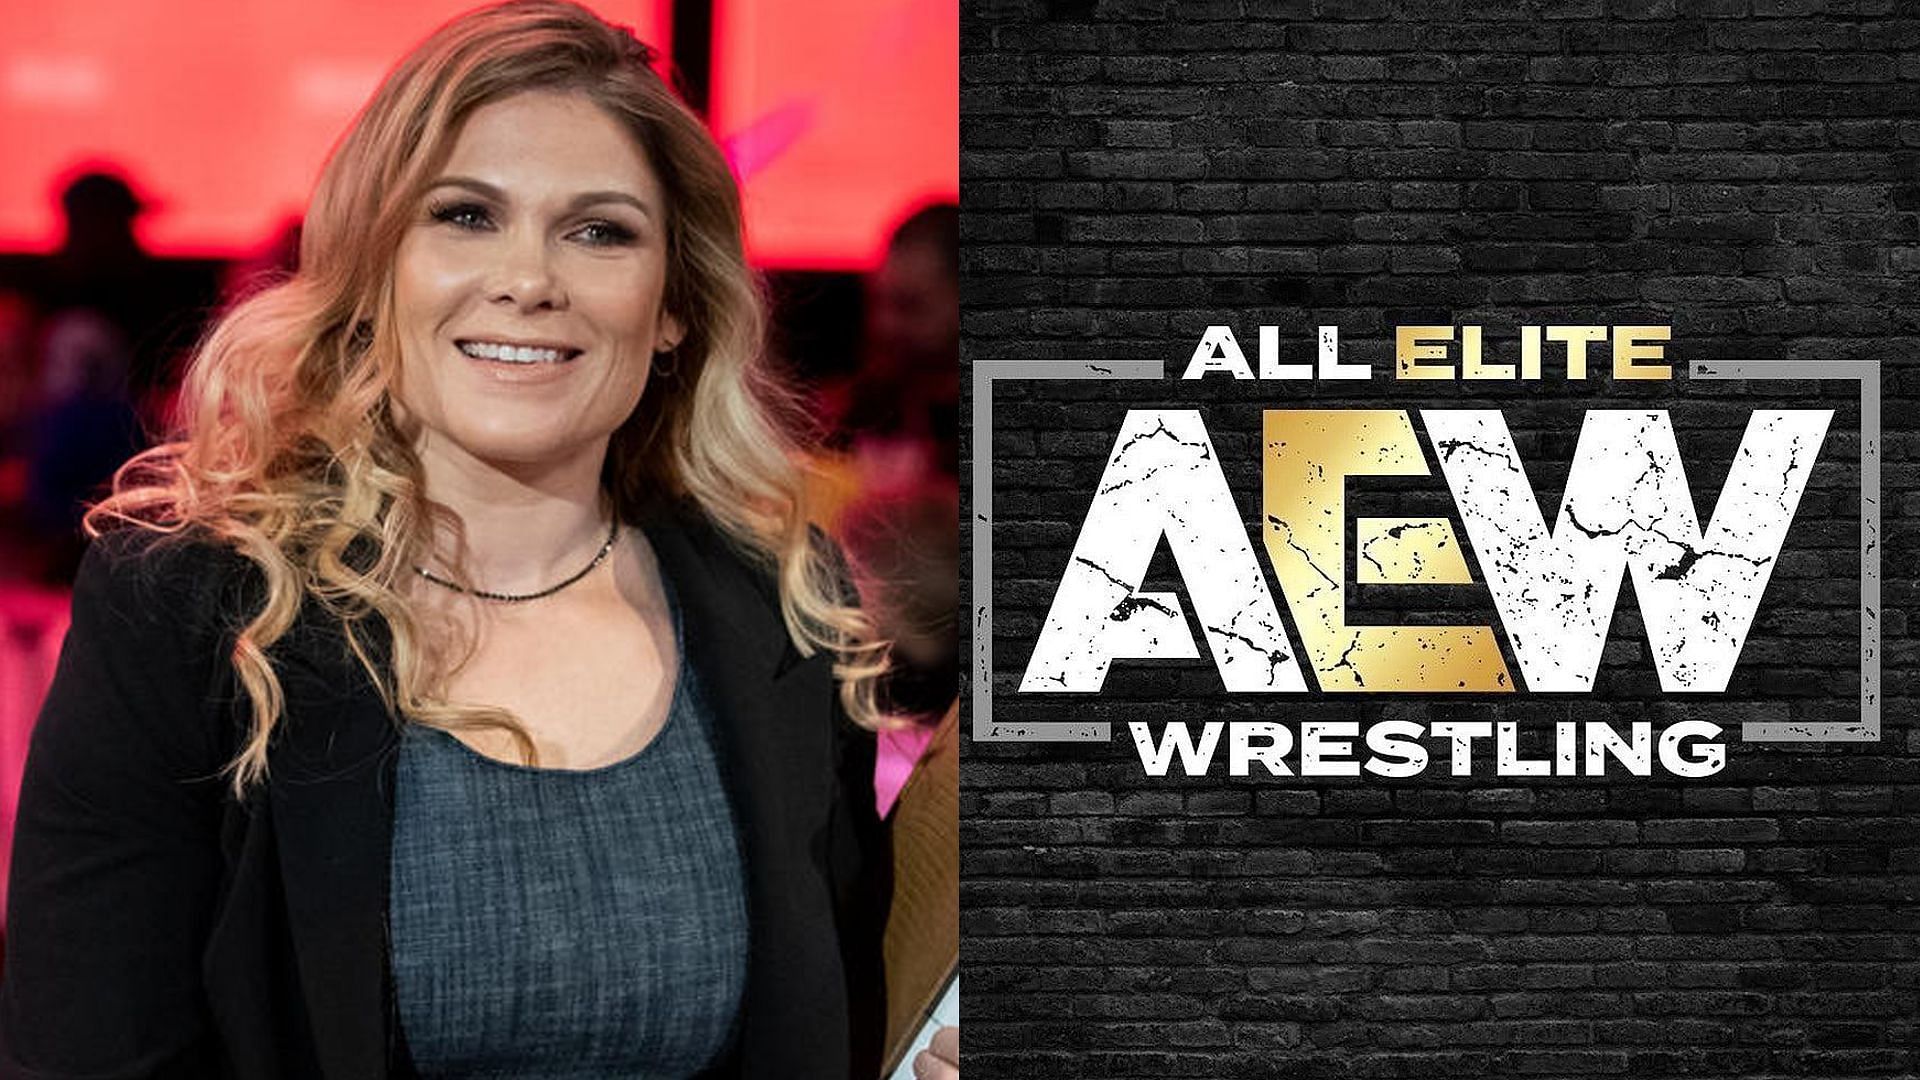 Beth Phoenix is looking forward to seeing a top match at Worlds End